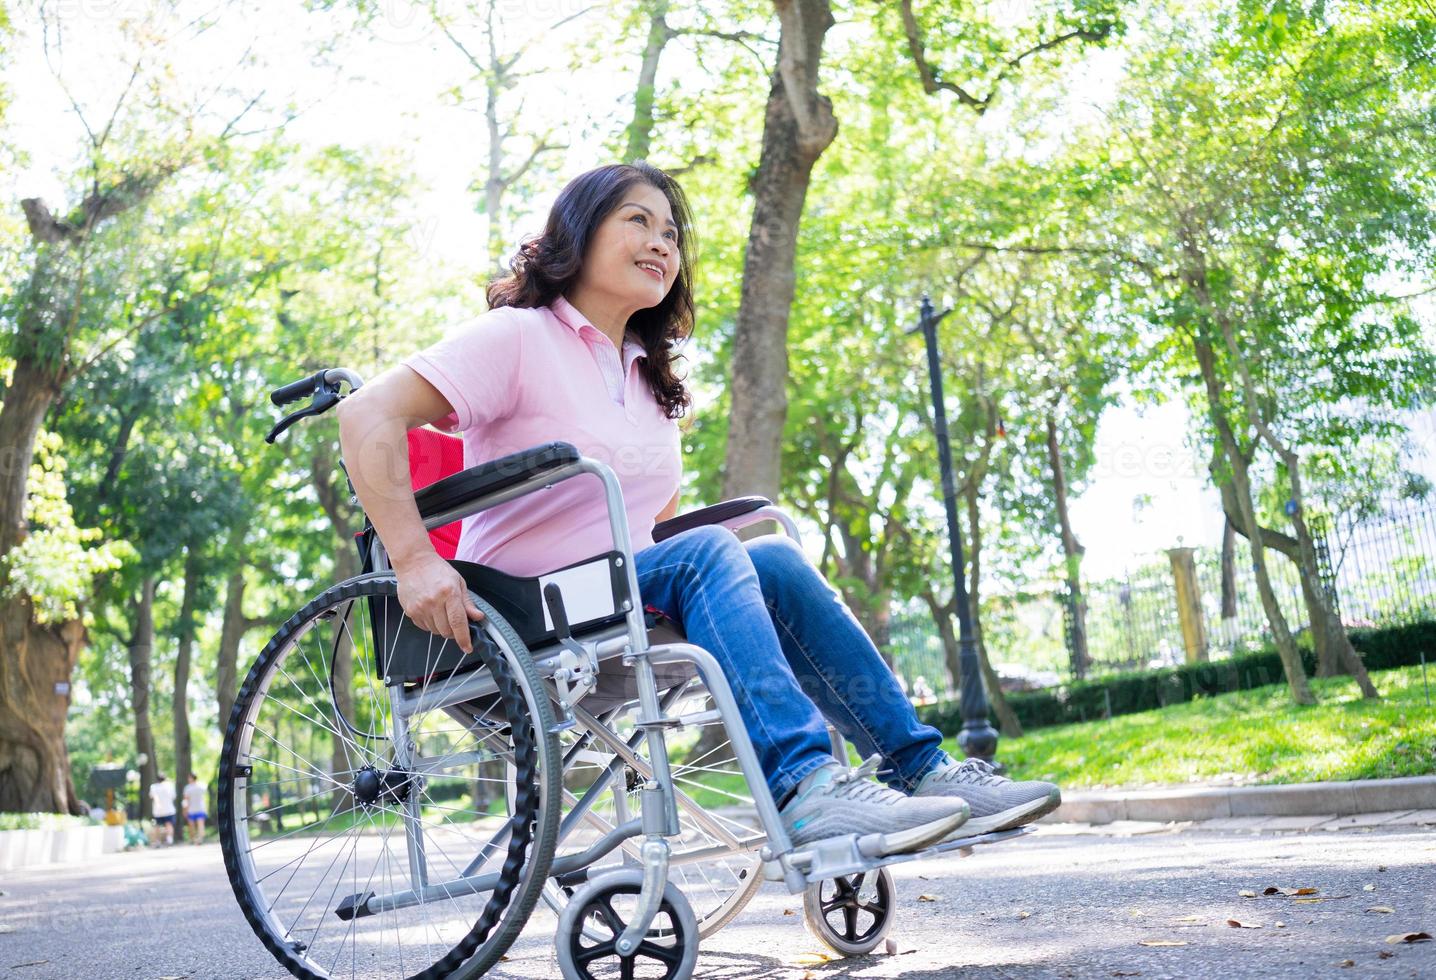 Image of middle-age Asian woman sitting on wheelchair photo